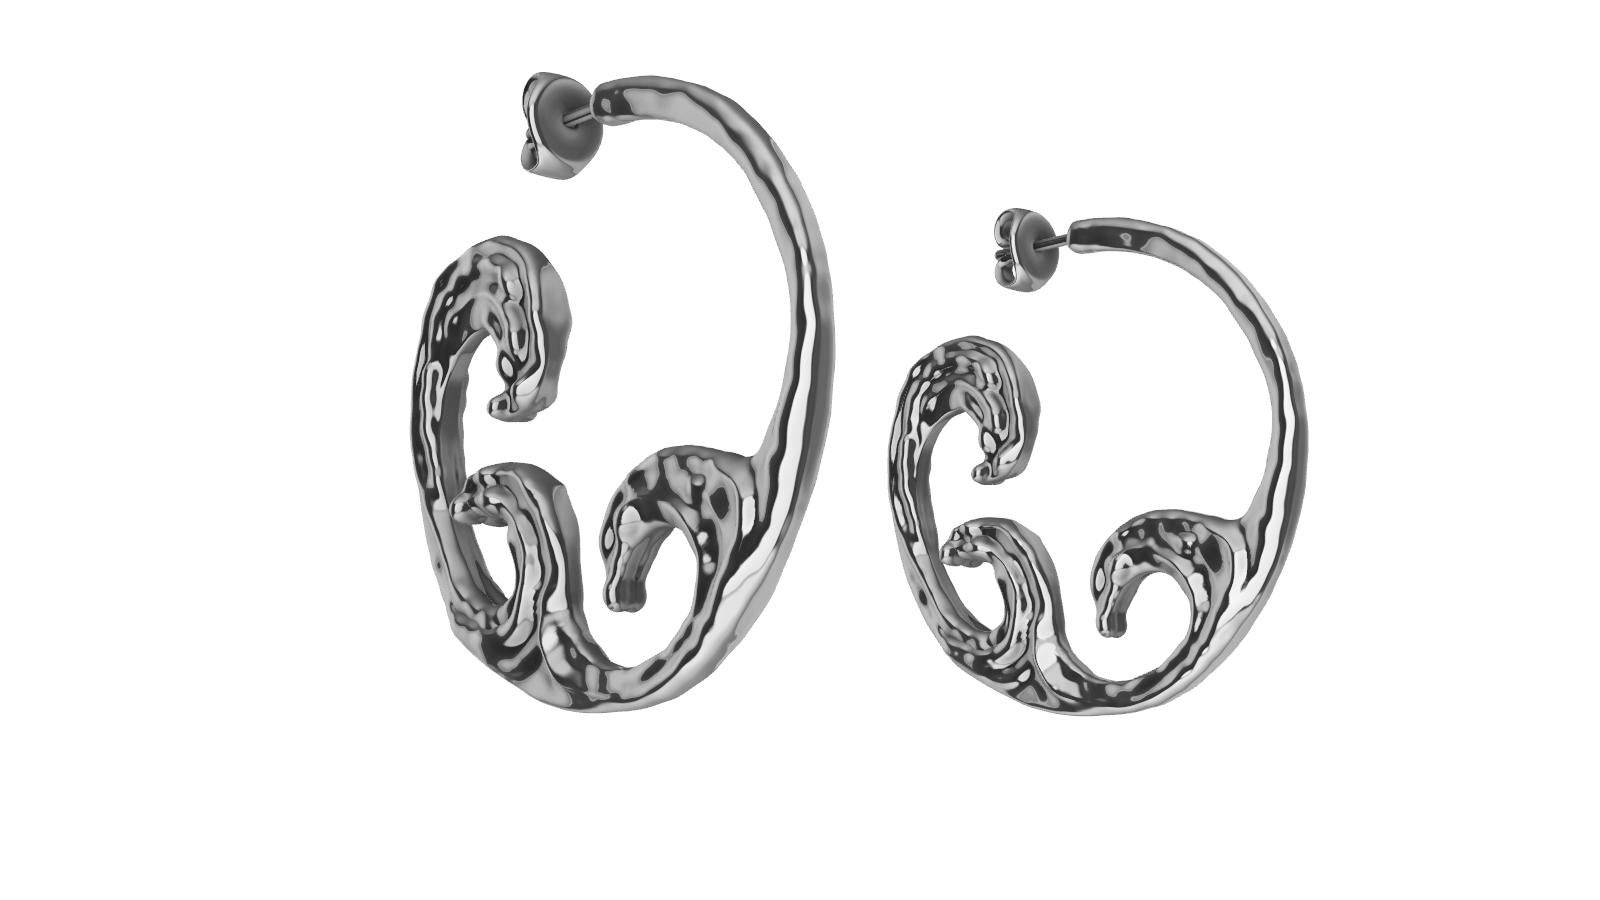 14 Karat White Gold 3 Wave Hoop Earrings, Tiffany designer, Thomas Kurilla Welcomes the new Light , Water, Mind Collection. 2 herniated discs in 2018 , and the discovery of Cyrotherapy in 2020. This passion for the light on the ocean reflecting and